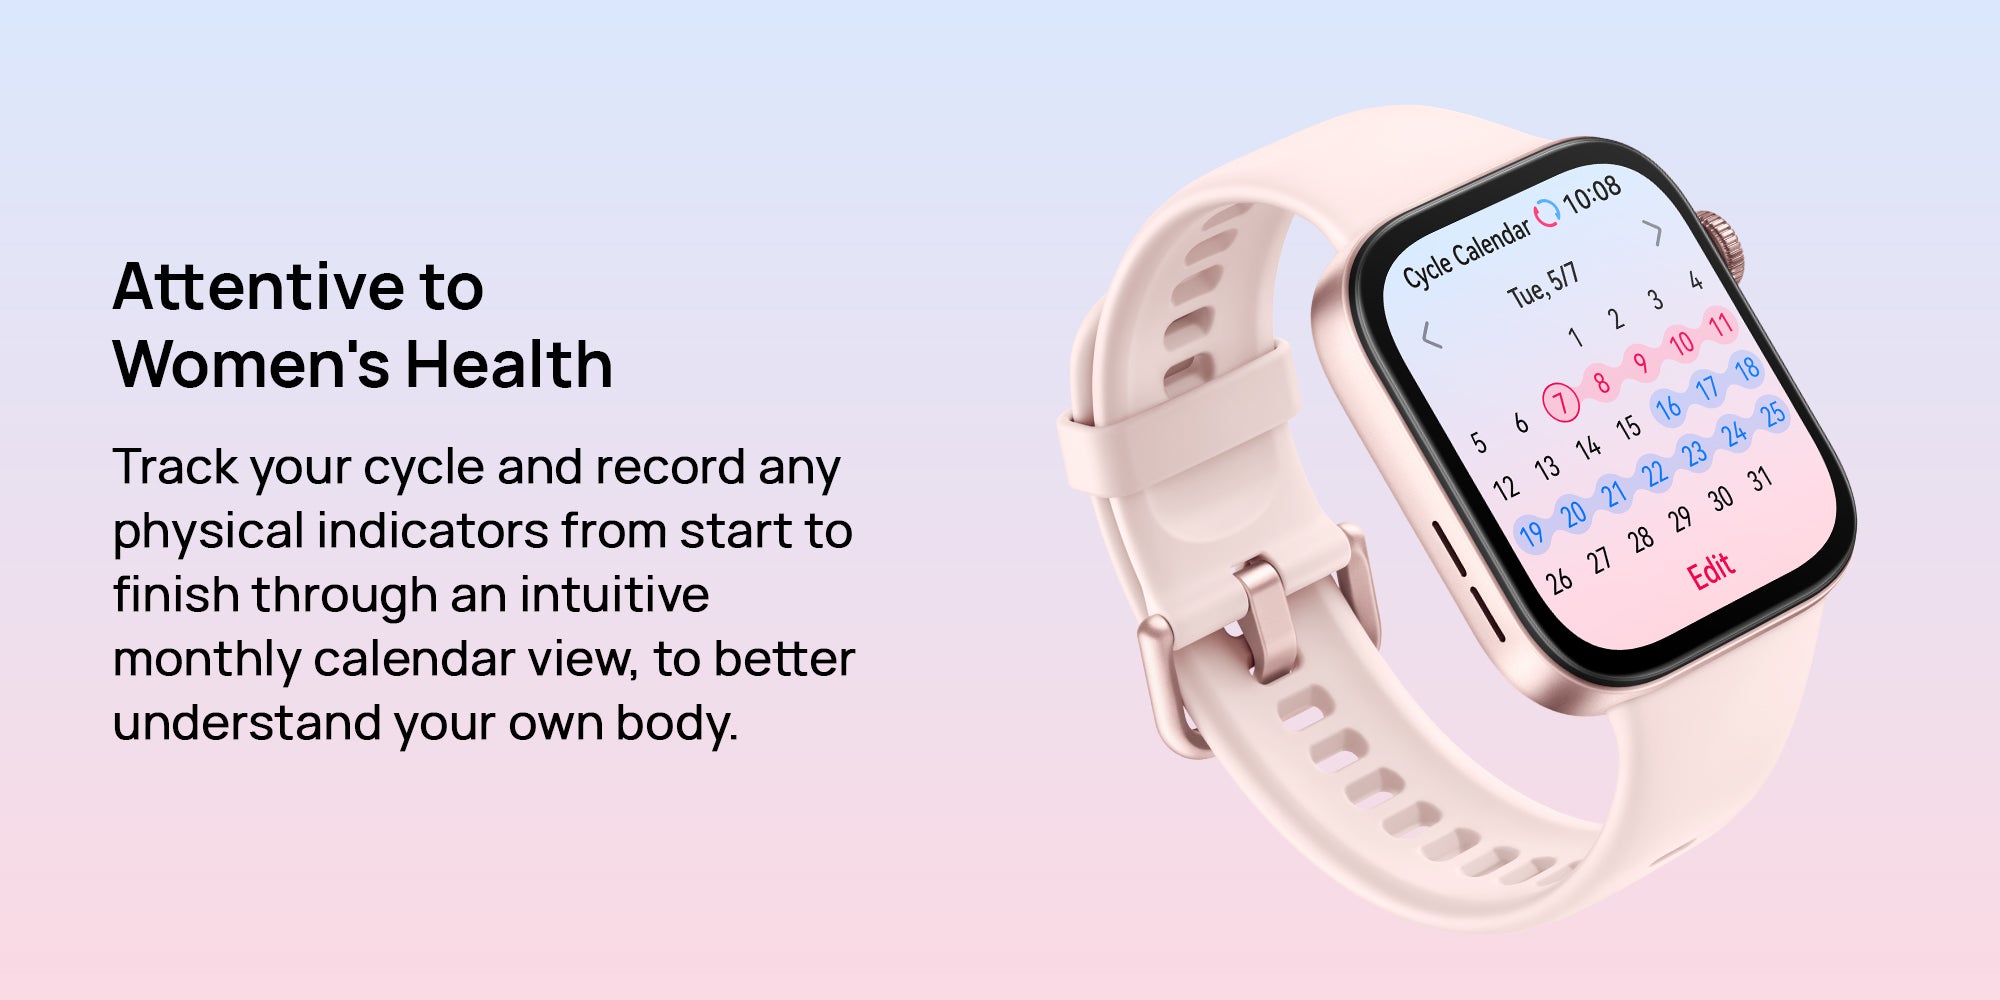 Watch Fit 3 Smartwatch, 1.82 Inch AMOLED Display, Ultra Slim Design, Scientific Workout Coach, Upgraded Health Management, Compatible With iOS And Android, Strap Pink